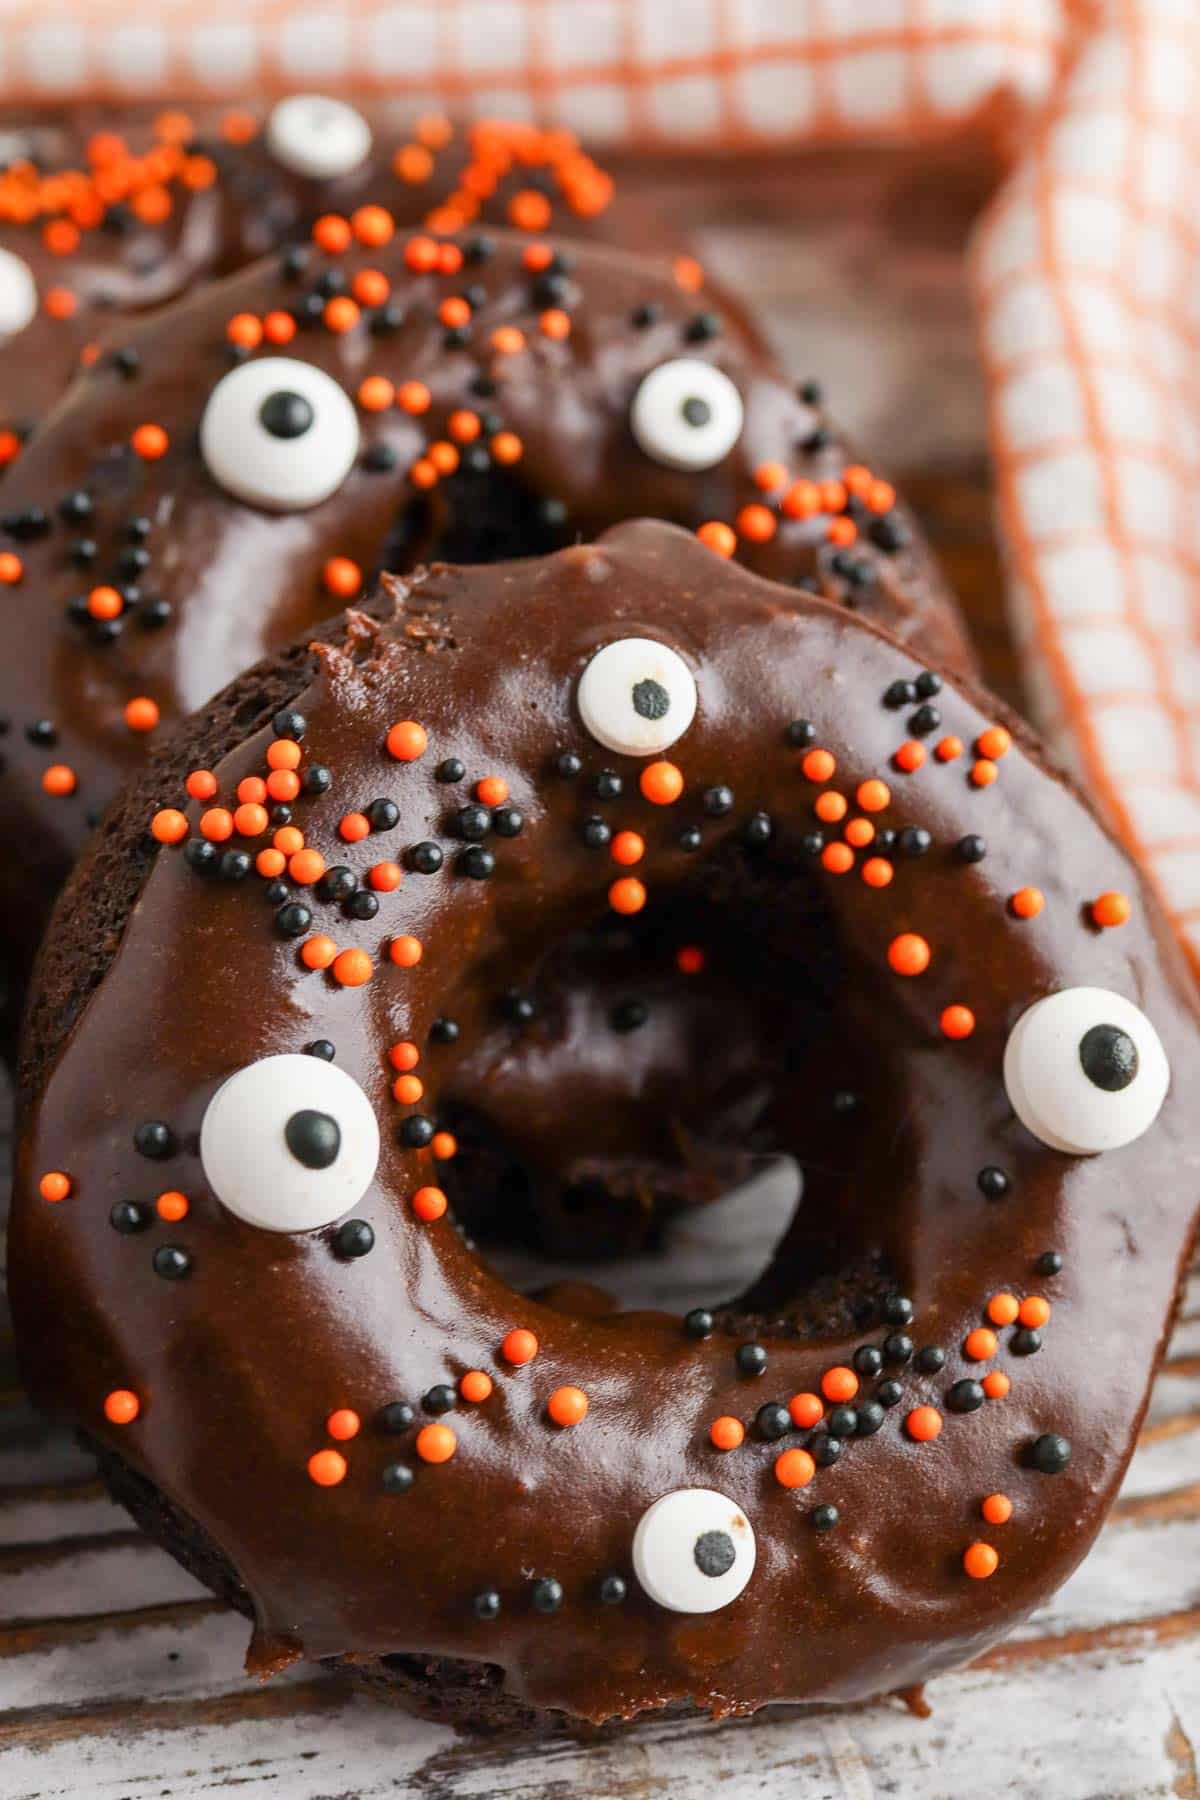 cake mix donut for halloween close up.